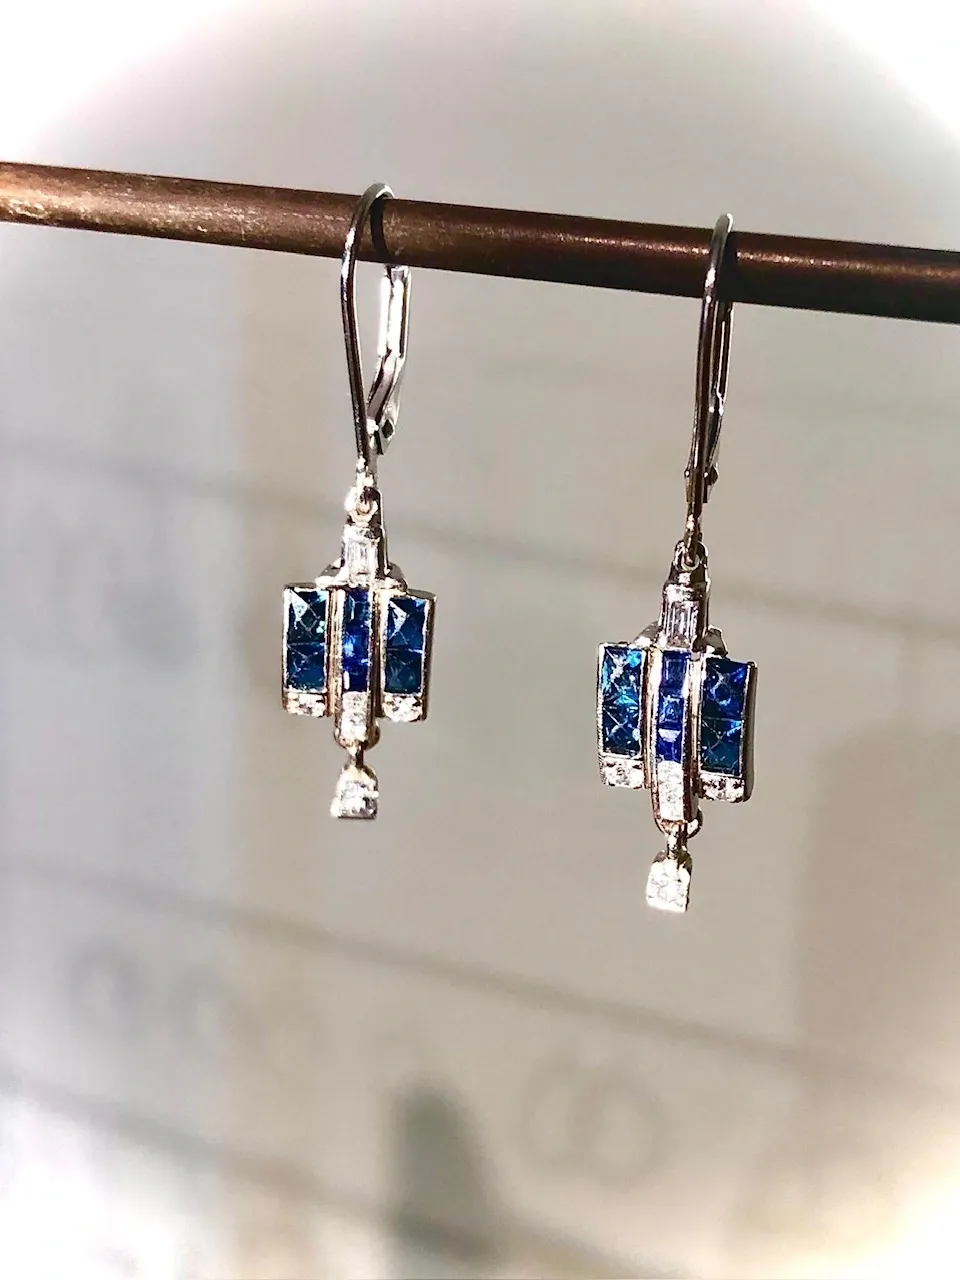 A pair of earrings hanging from a metal bar.